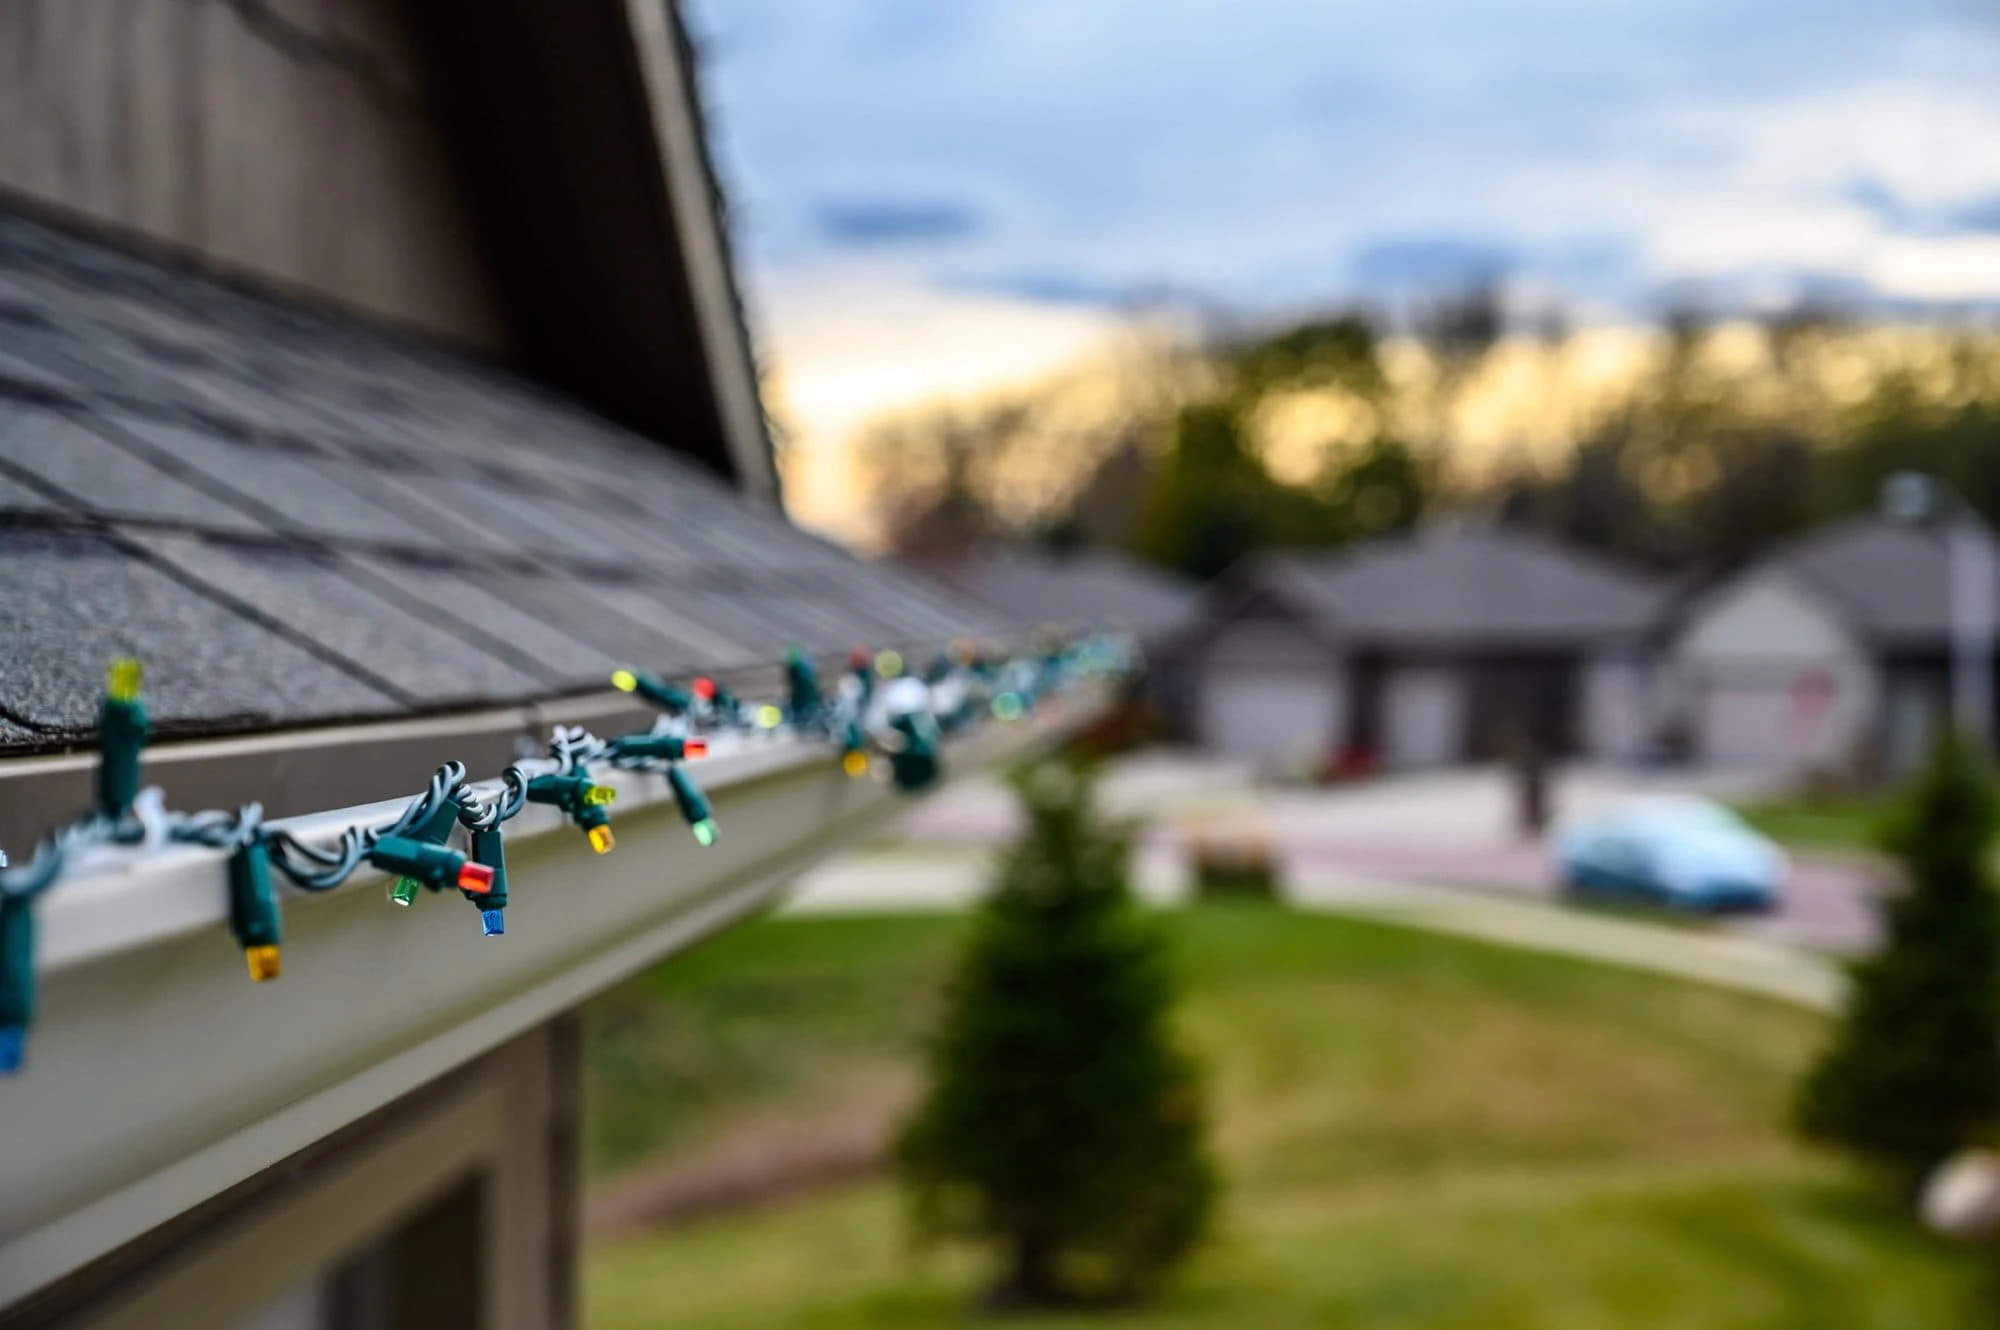 How Much Power Do Christmas Lights Use?